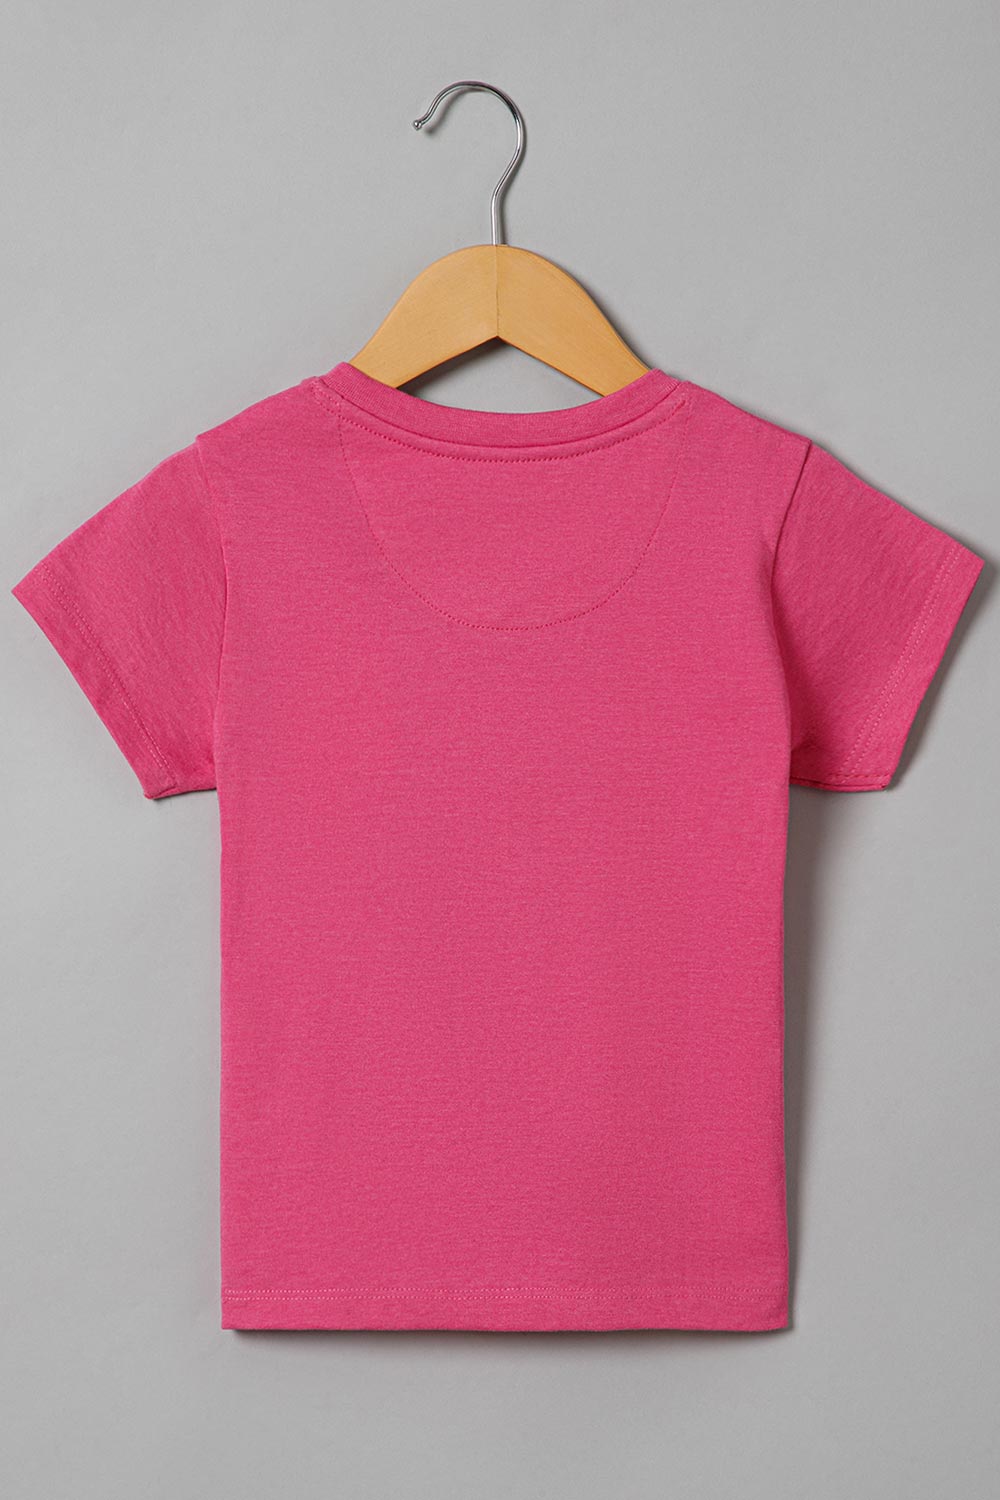 The Young Future Girls T-shirt - Pink - GT05